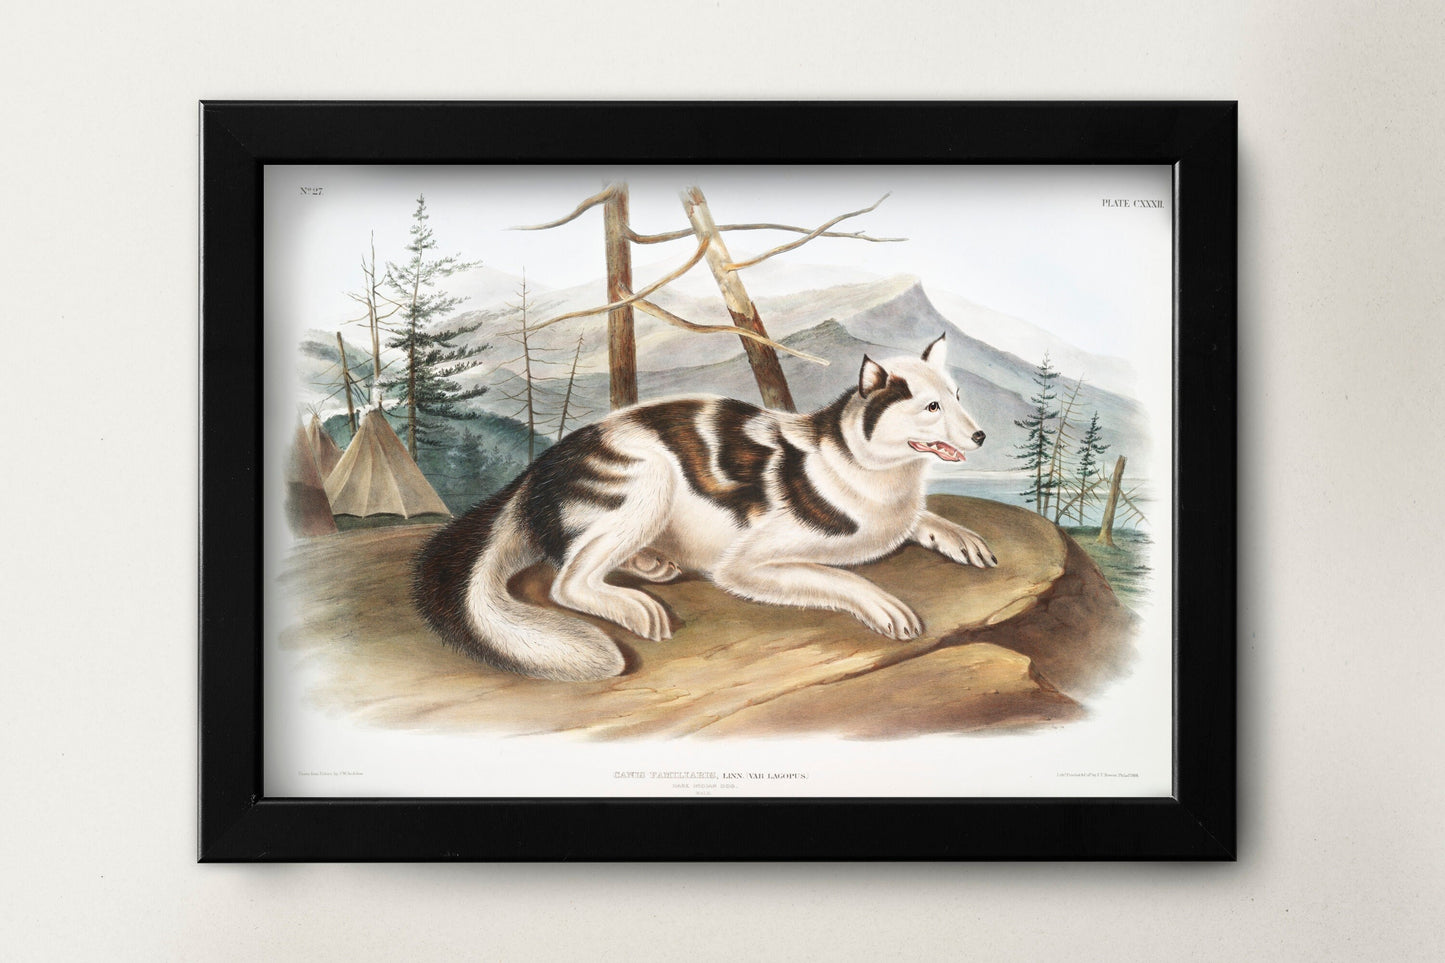 Hare-Indian Dog Illustration Poster Print Wall Hanging Decor A4 A3 A2